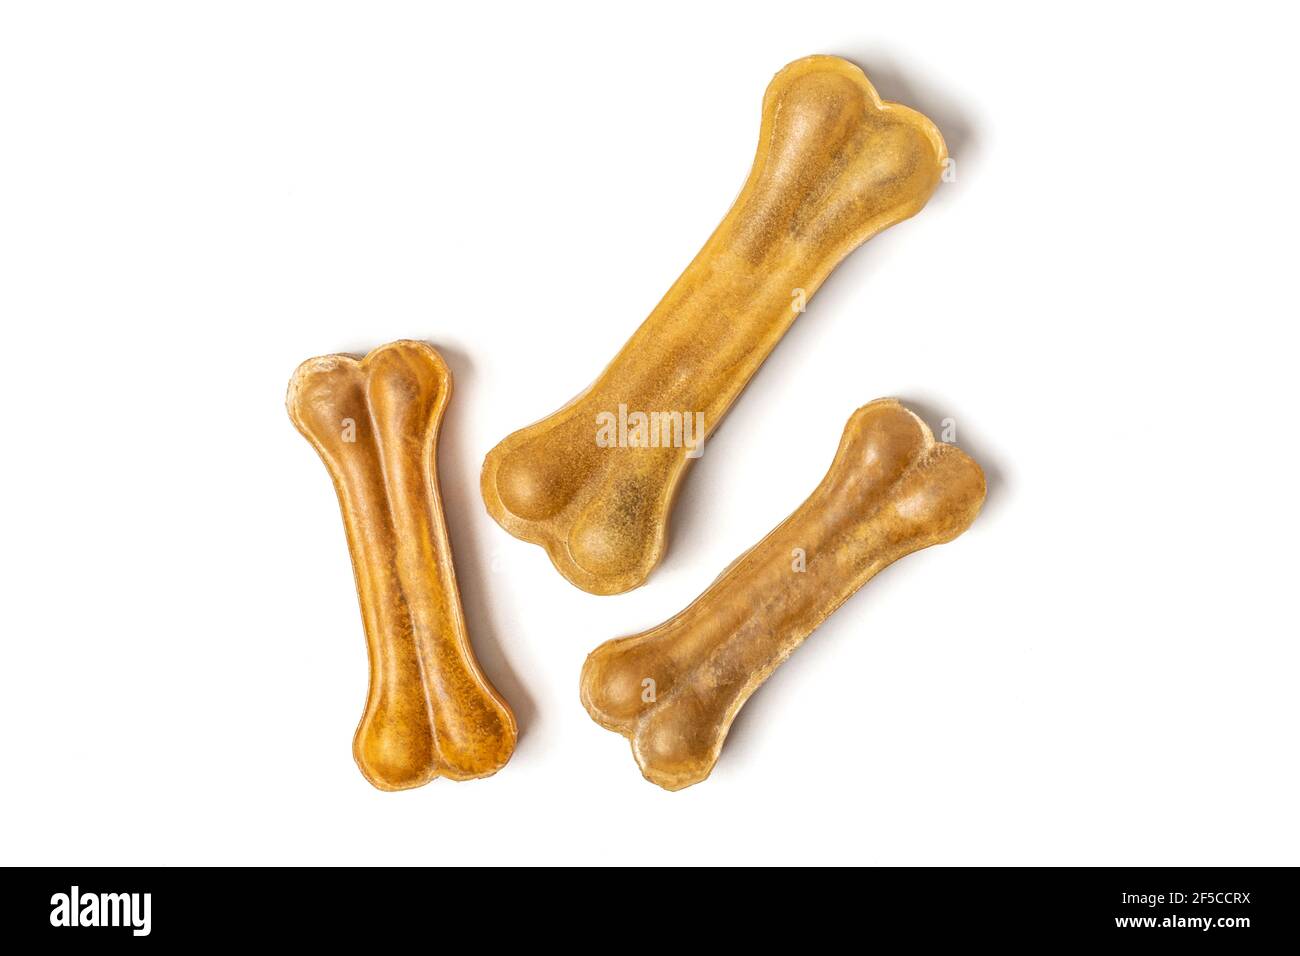 bone for dogs isolated on white background Top view Flat lay Delicious treat for your beloved pet Food for animals concept. Stock Photo